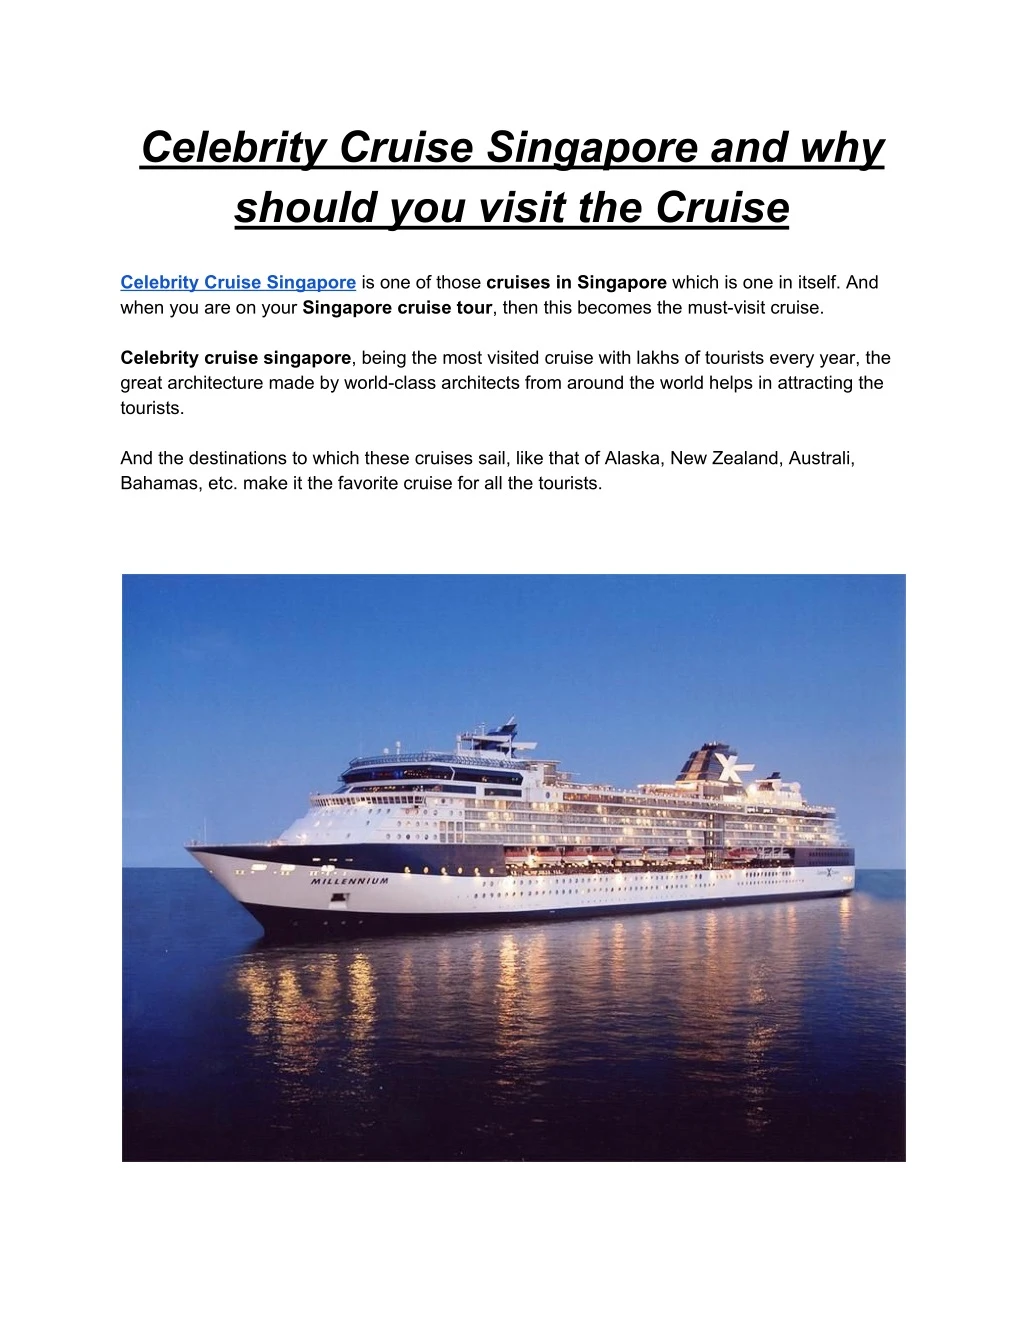 celebrity cruise singapore and why should